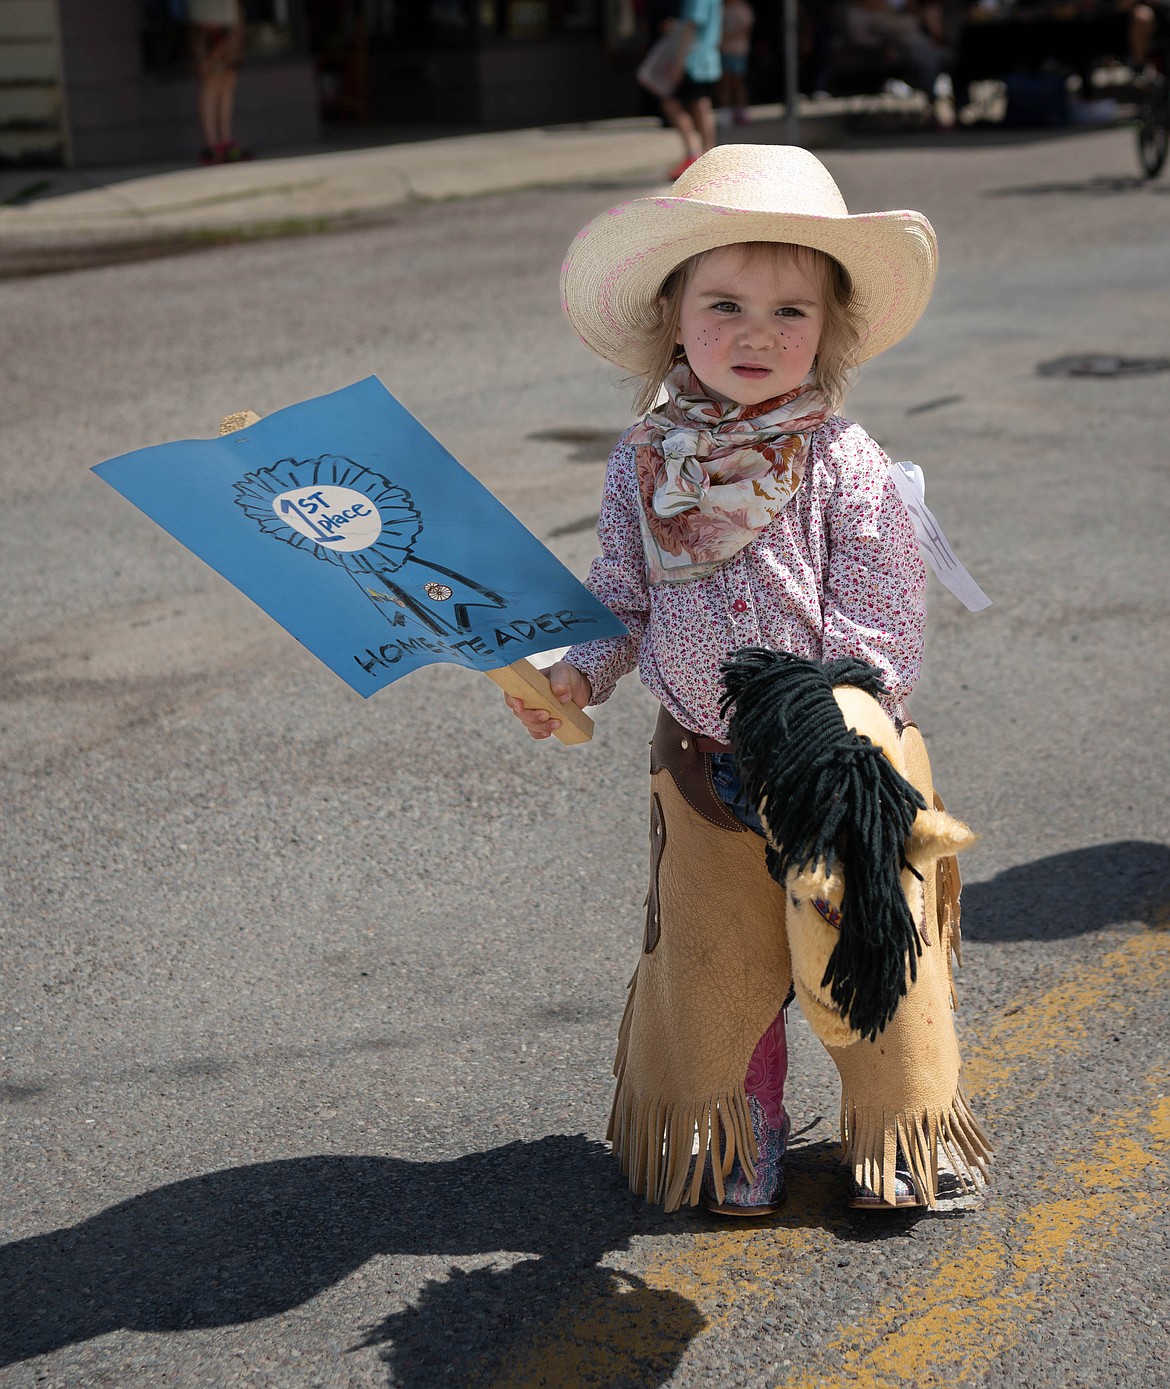 Maclei Kelley, 2, took first place in the Kiddy Parade homesteader category. (Tracy Scott/Valley Press)